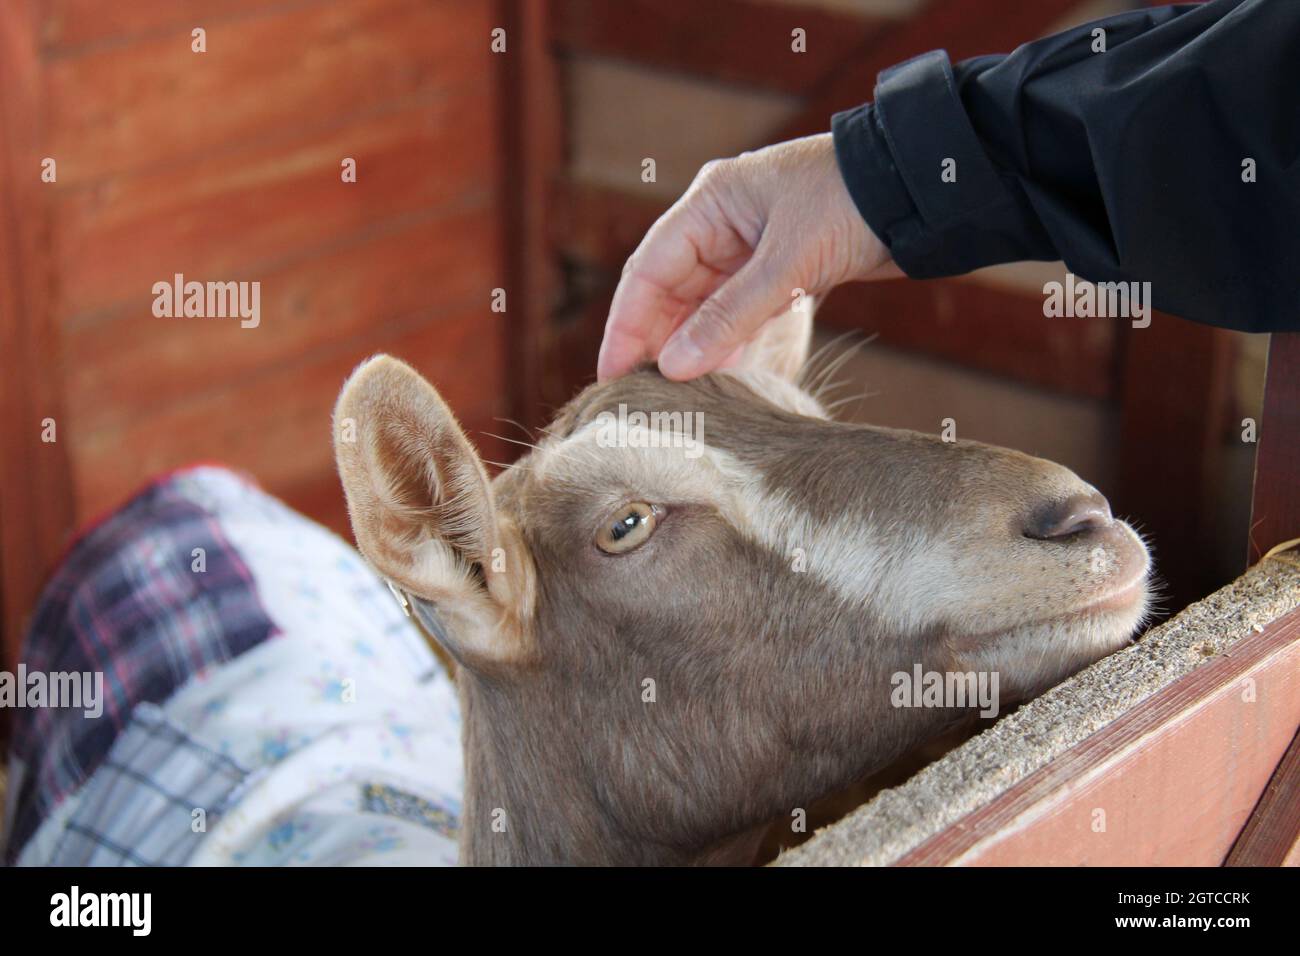 A Friendly Goat in a Pen Having its Head Scratched. Stock Photo